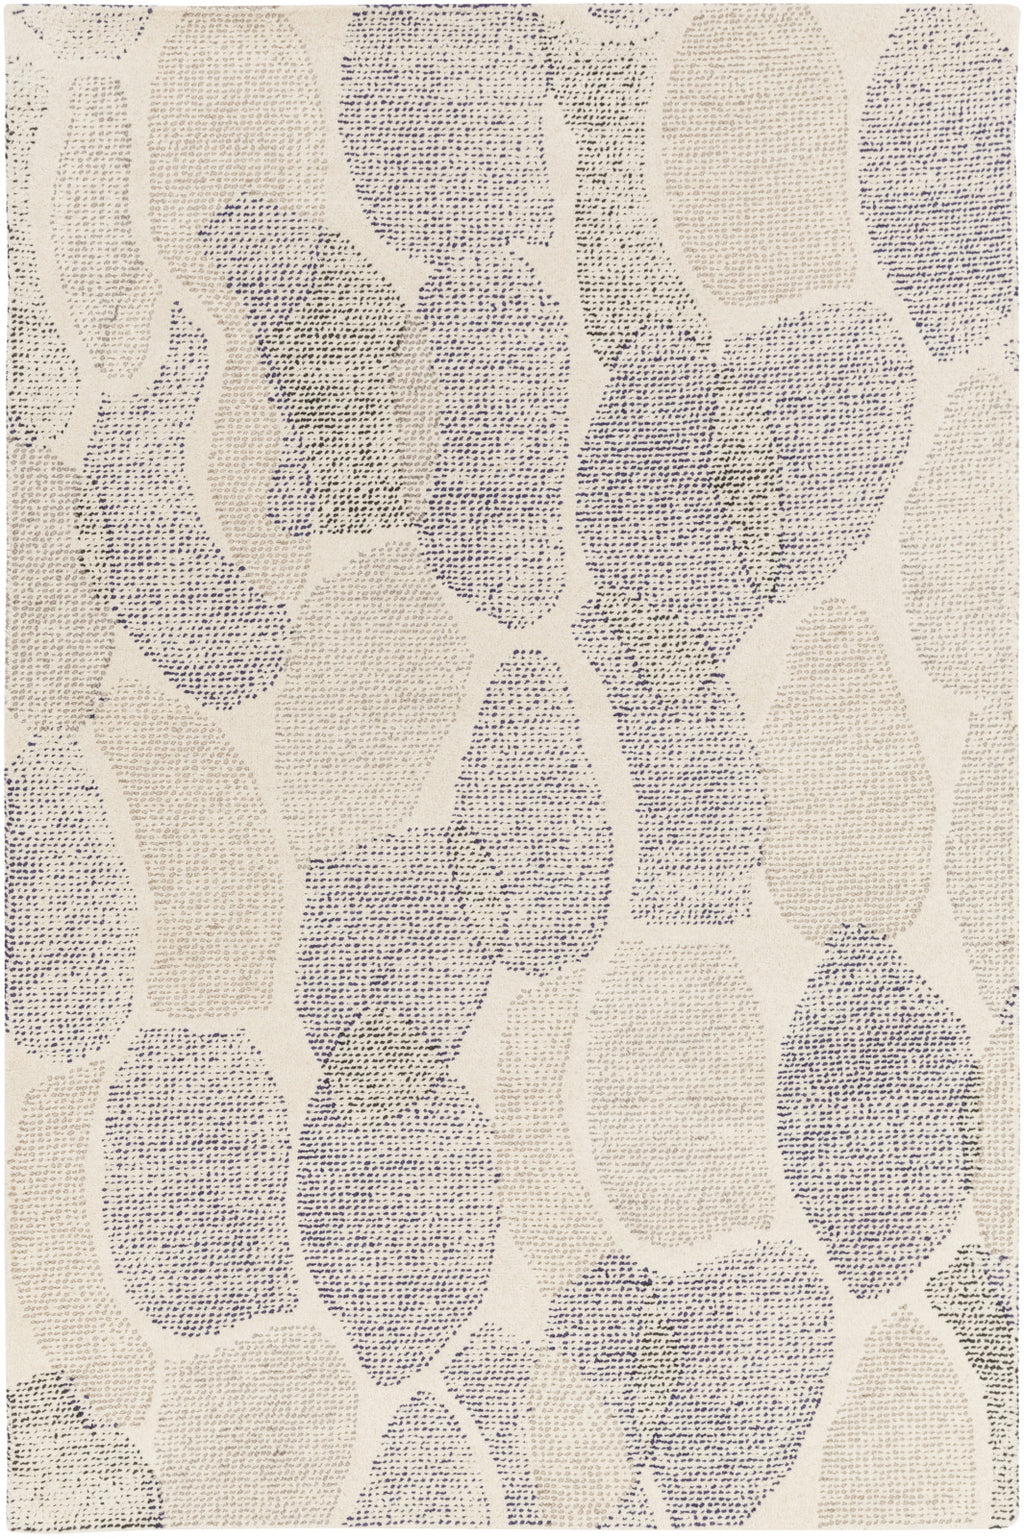 Melody MDY-2010 White Area Rug by Surya